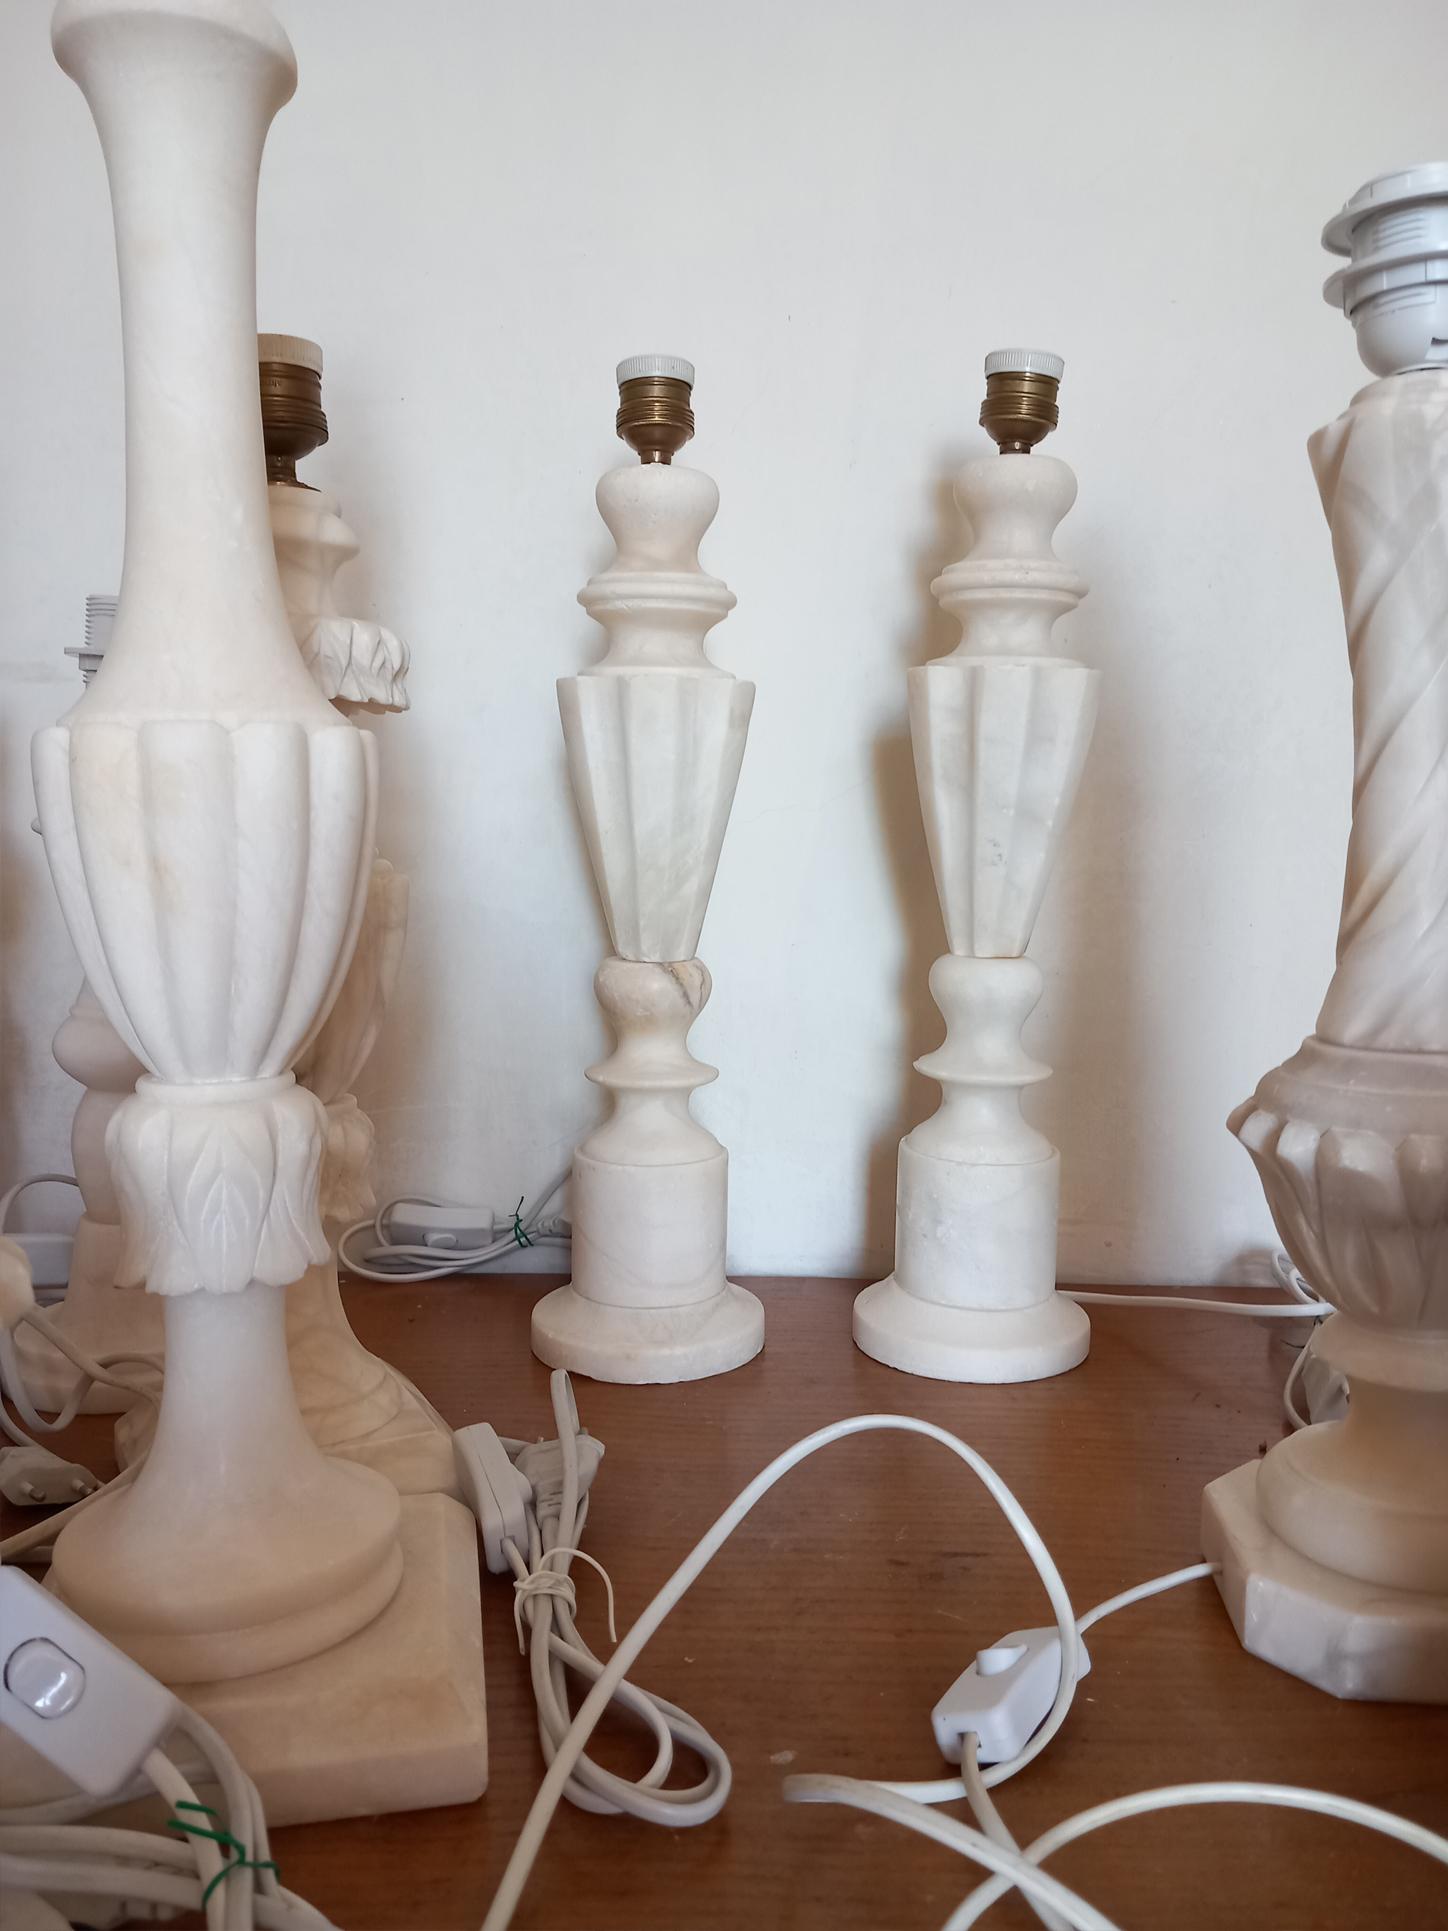 Alabaster Table Lamps Large Column Shape White Italy 20th Century In Excellent Condition For Sale In Mombuey, Zamora